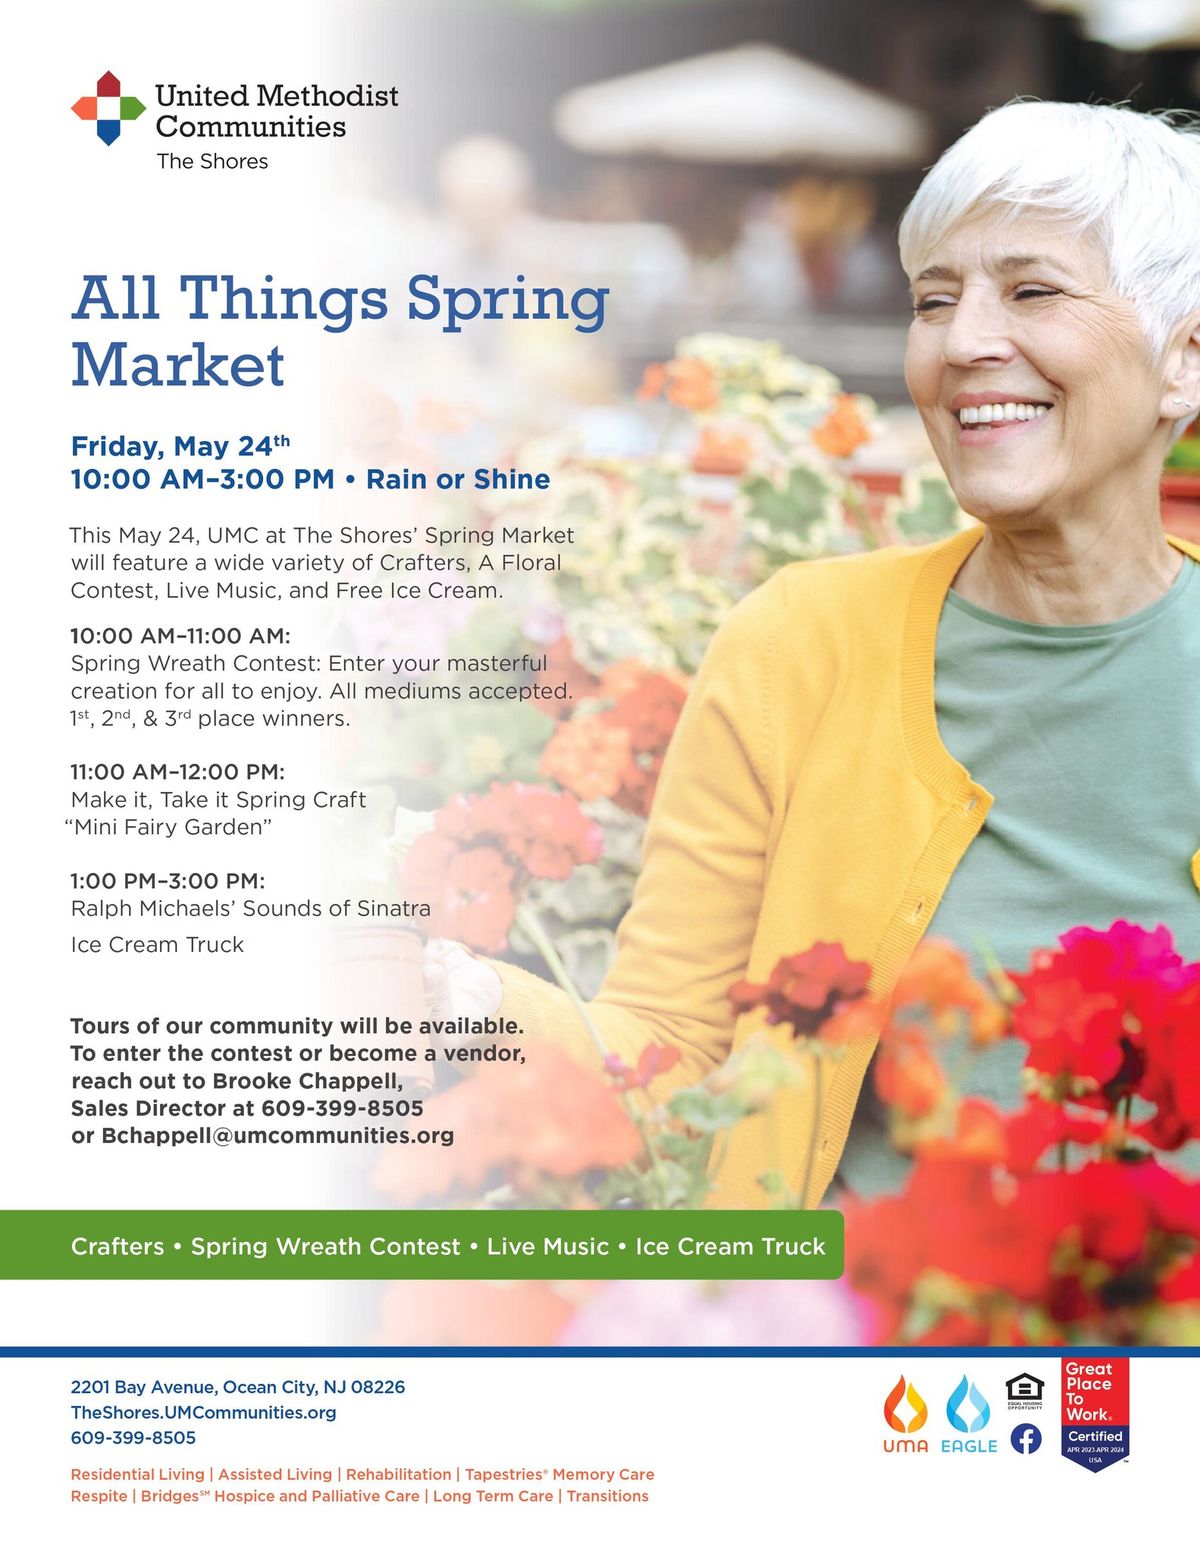 All Things Spring Market at The Shores